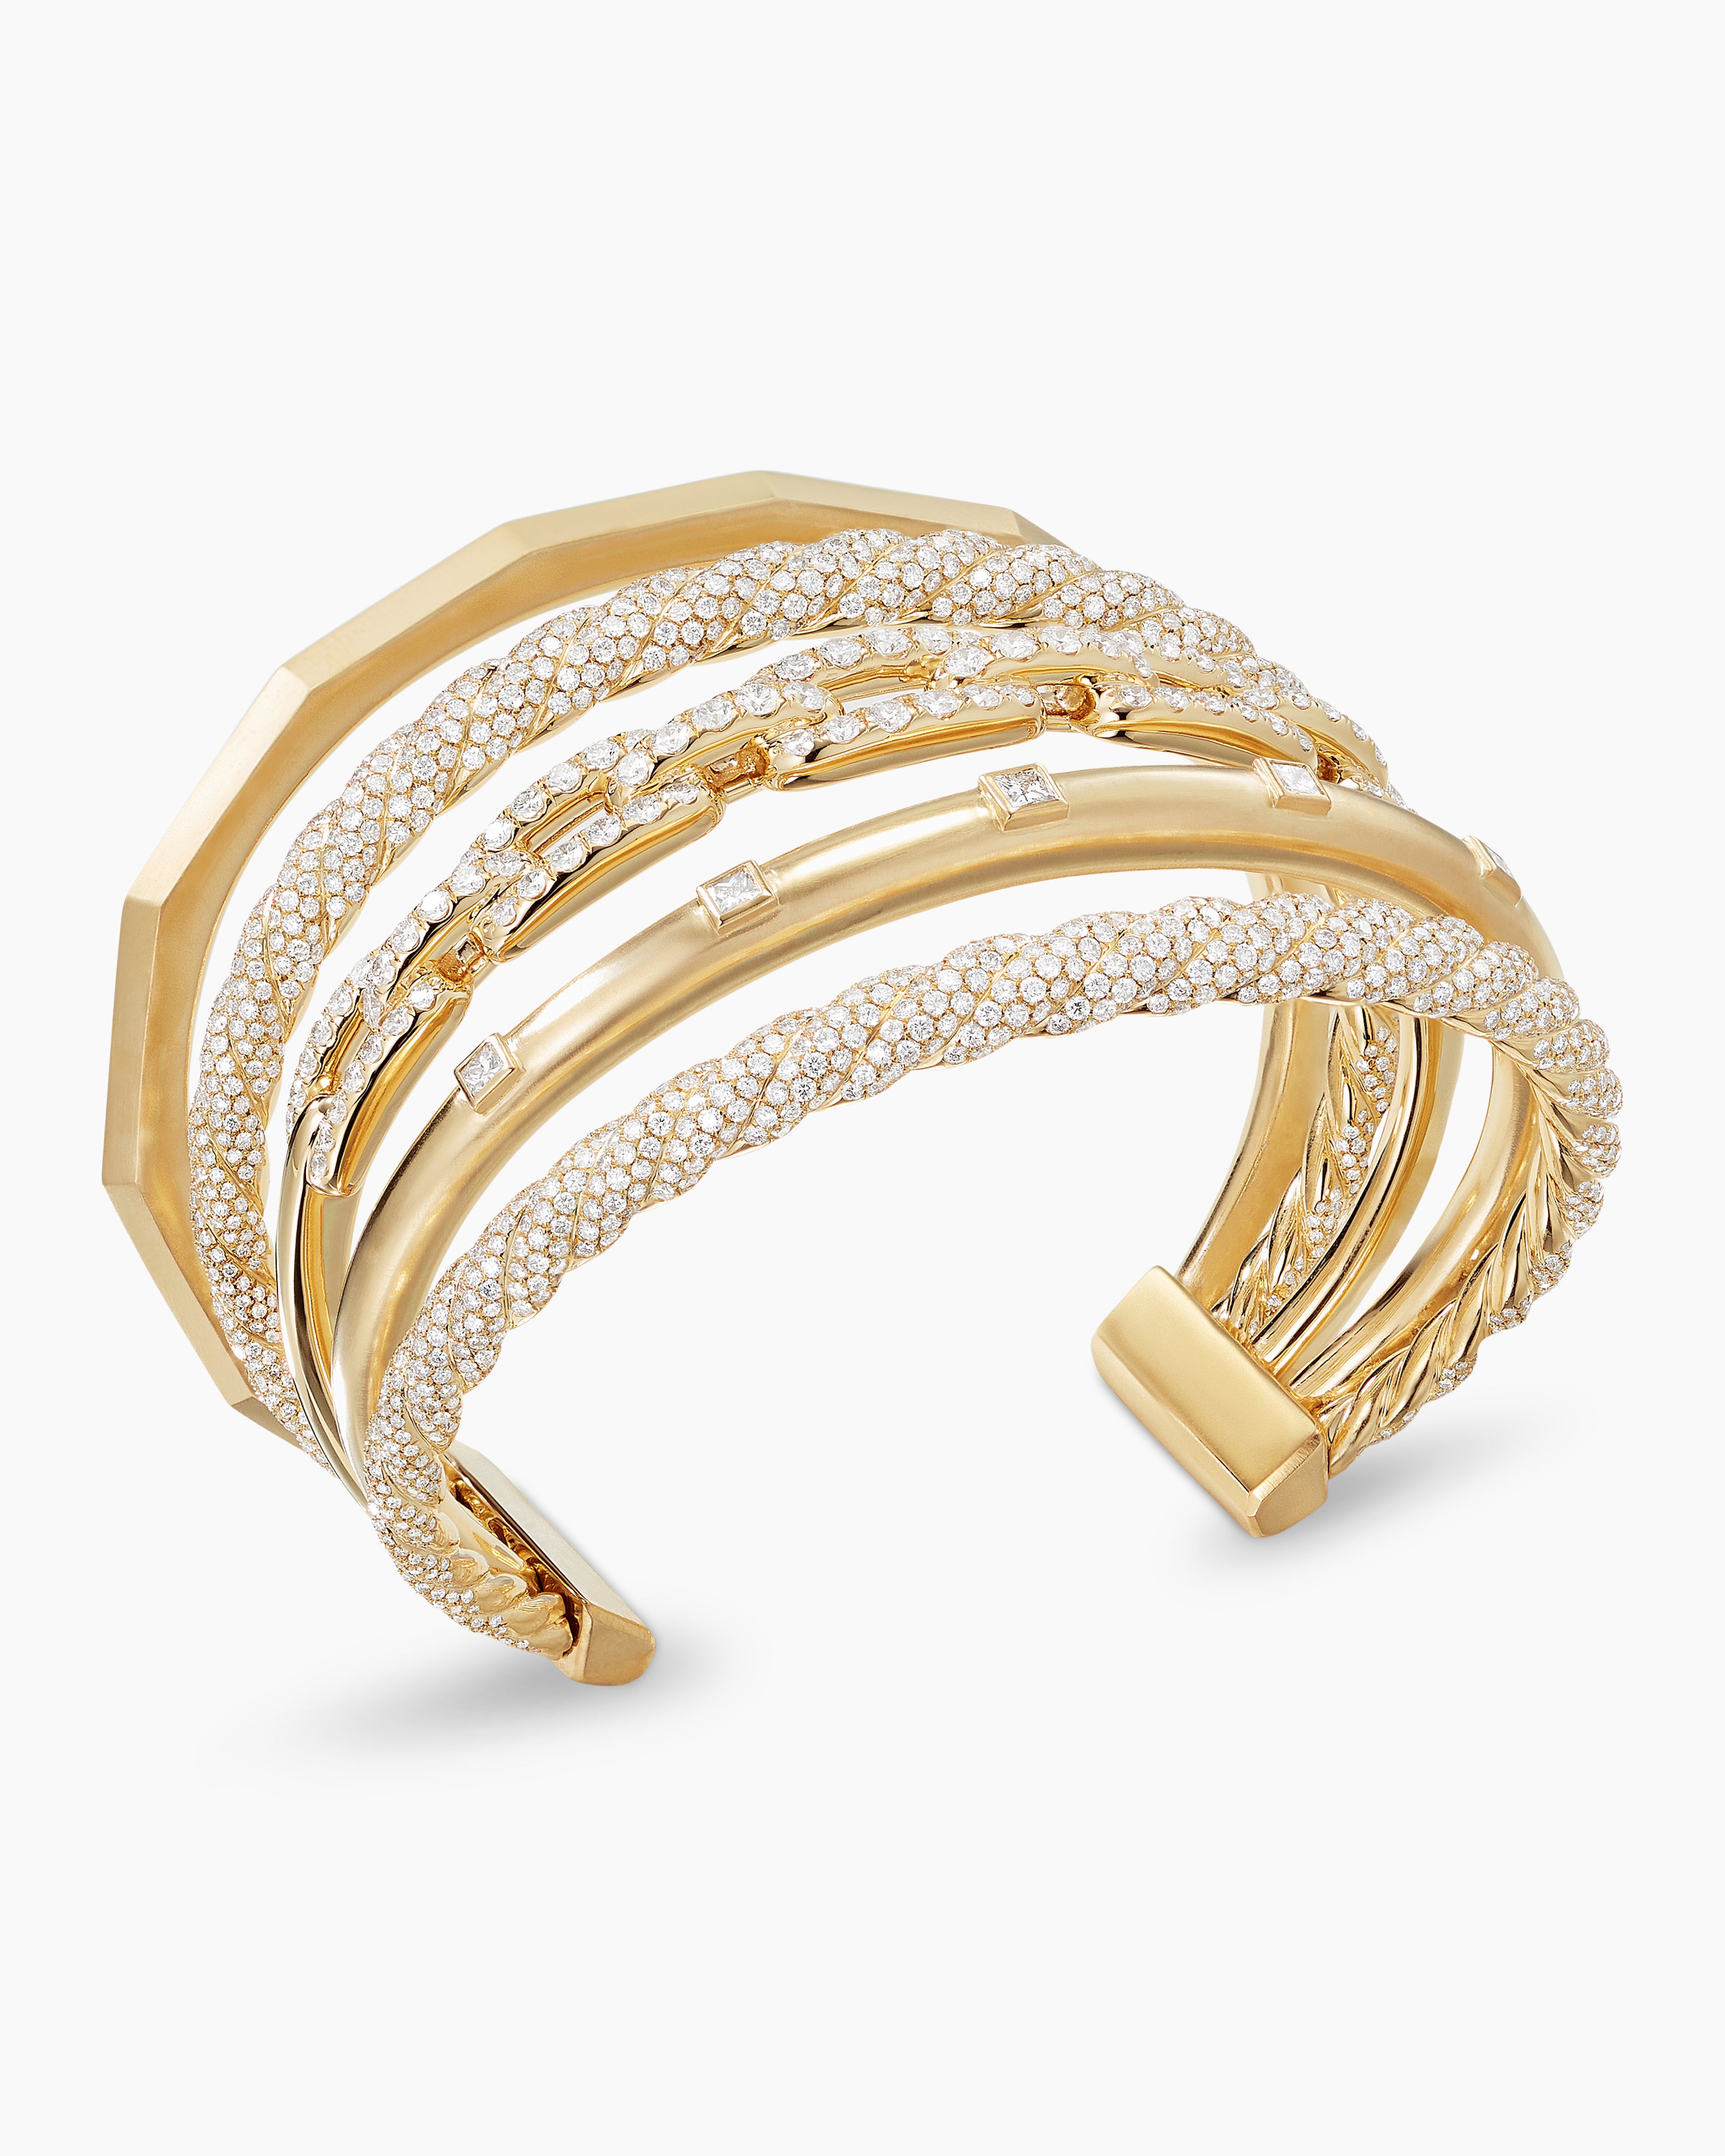 David Yurman DY Origami Cuff Bracelet in 18k Yellow Gold with Pave Diamonds  | Lee Michaels Fine Jewelry stores